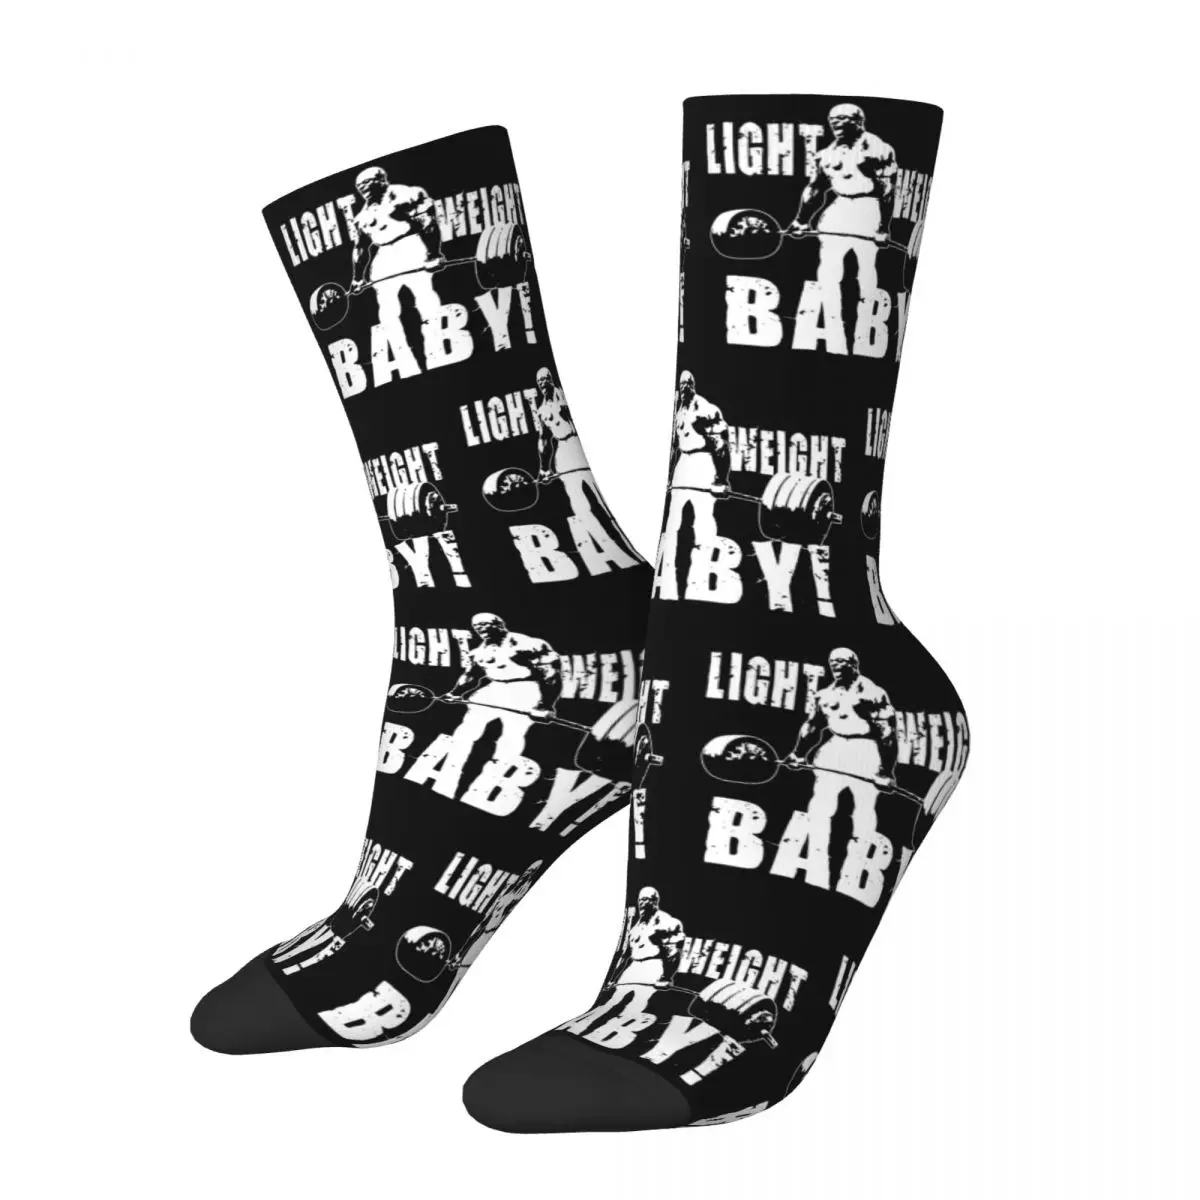 

Ronnie Coleman Legging Day Working Out Merch Crew Socks Cozy Bodybuilding Fitness Middle Tube Sock Cute for Men's Best Gifts